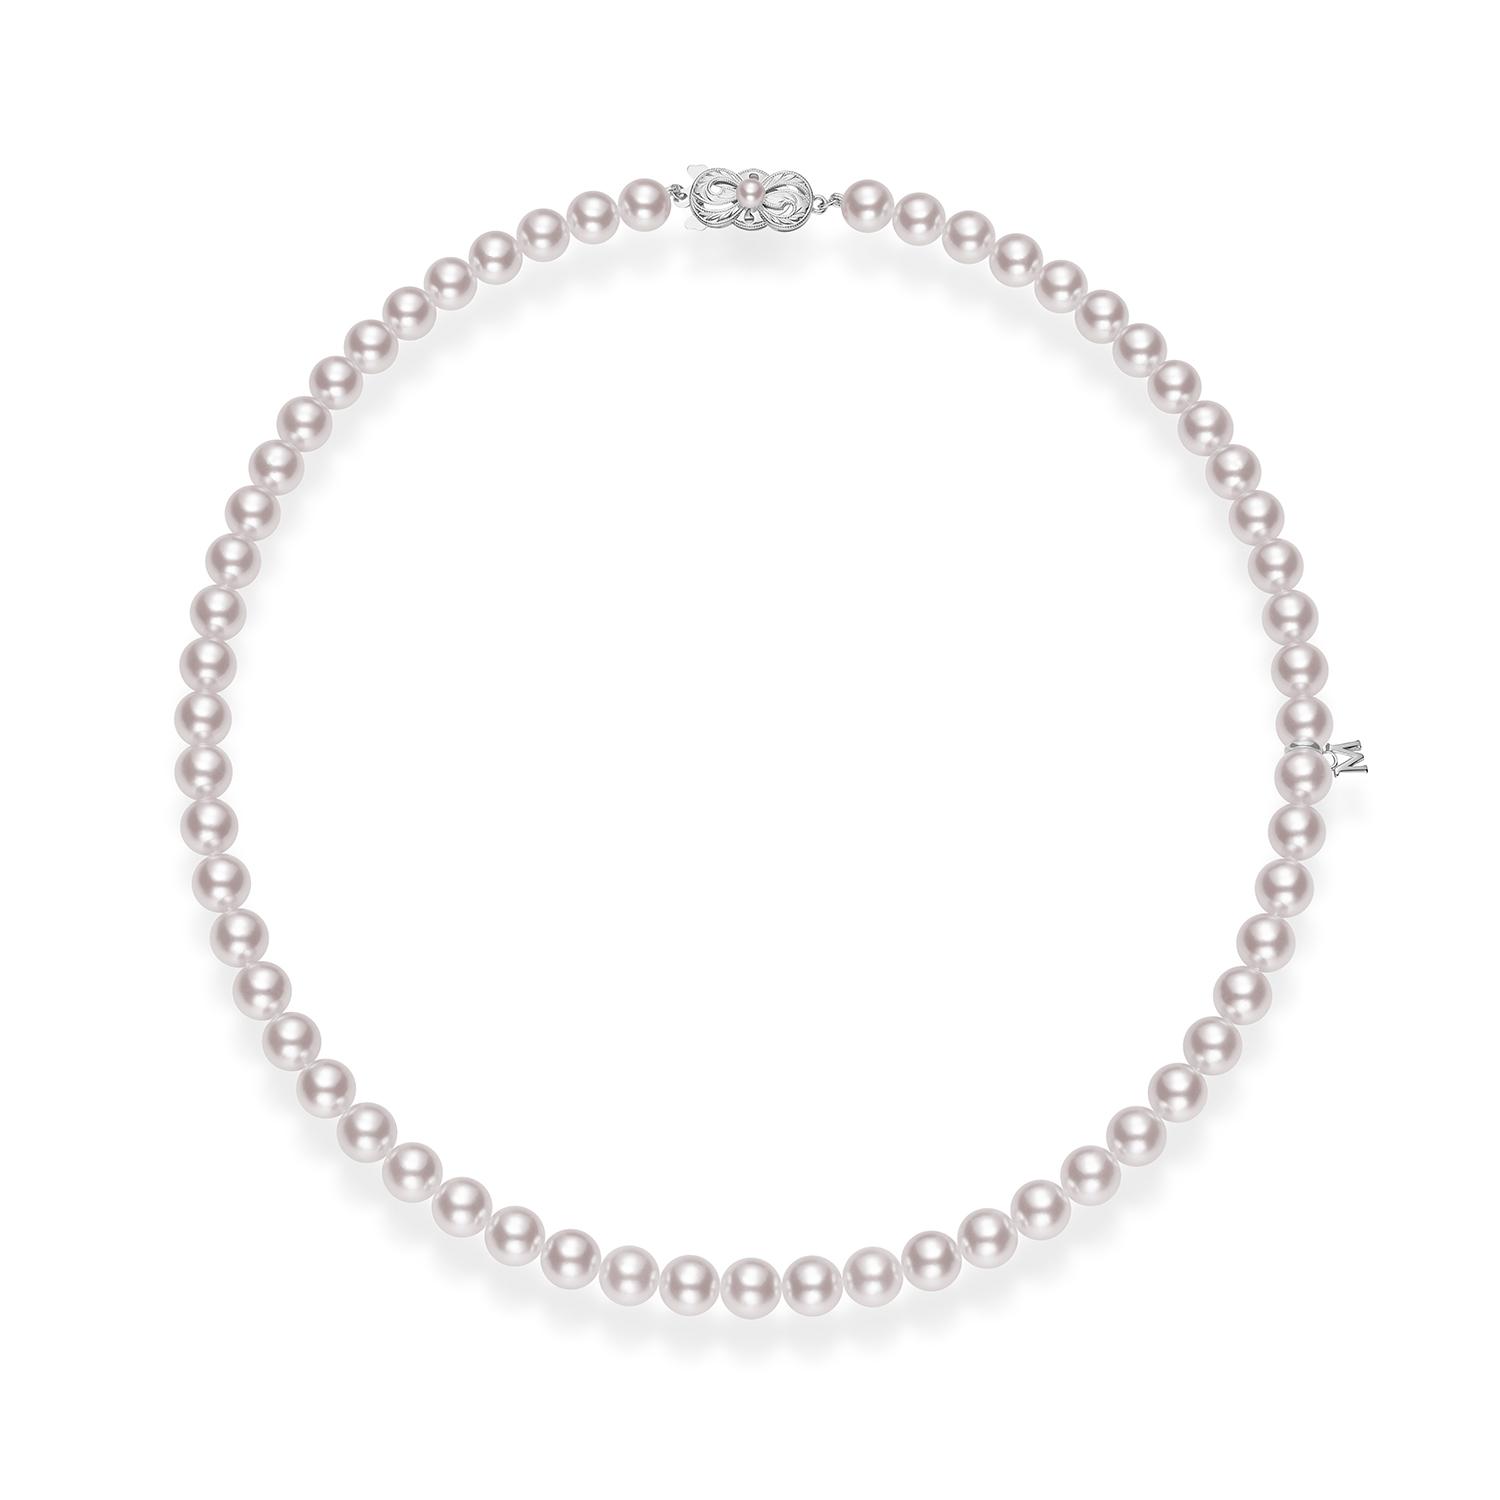 Mikimoto Matinee Length Pearl Strand Necklace, 20" 0